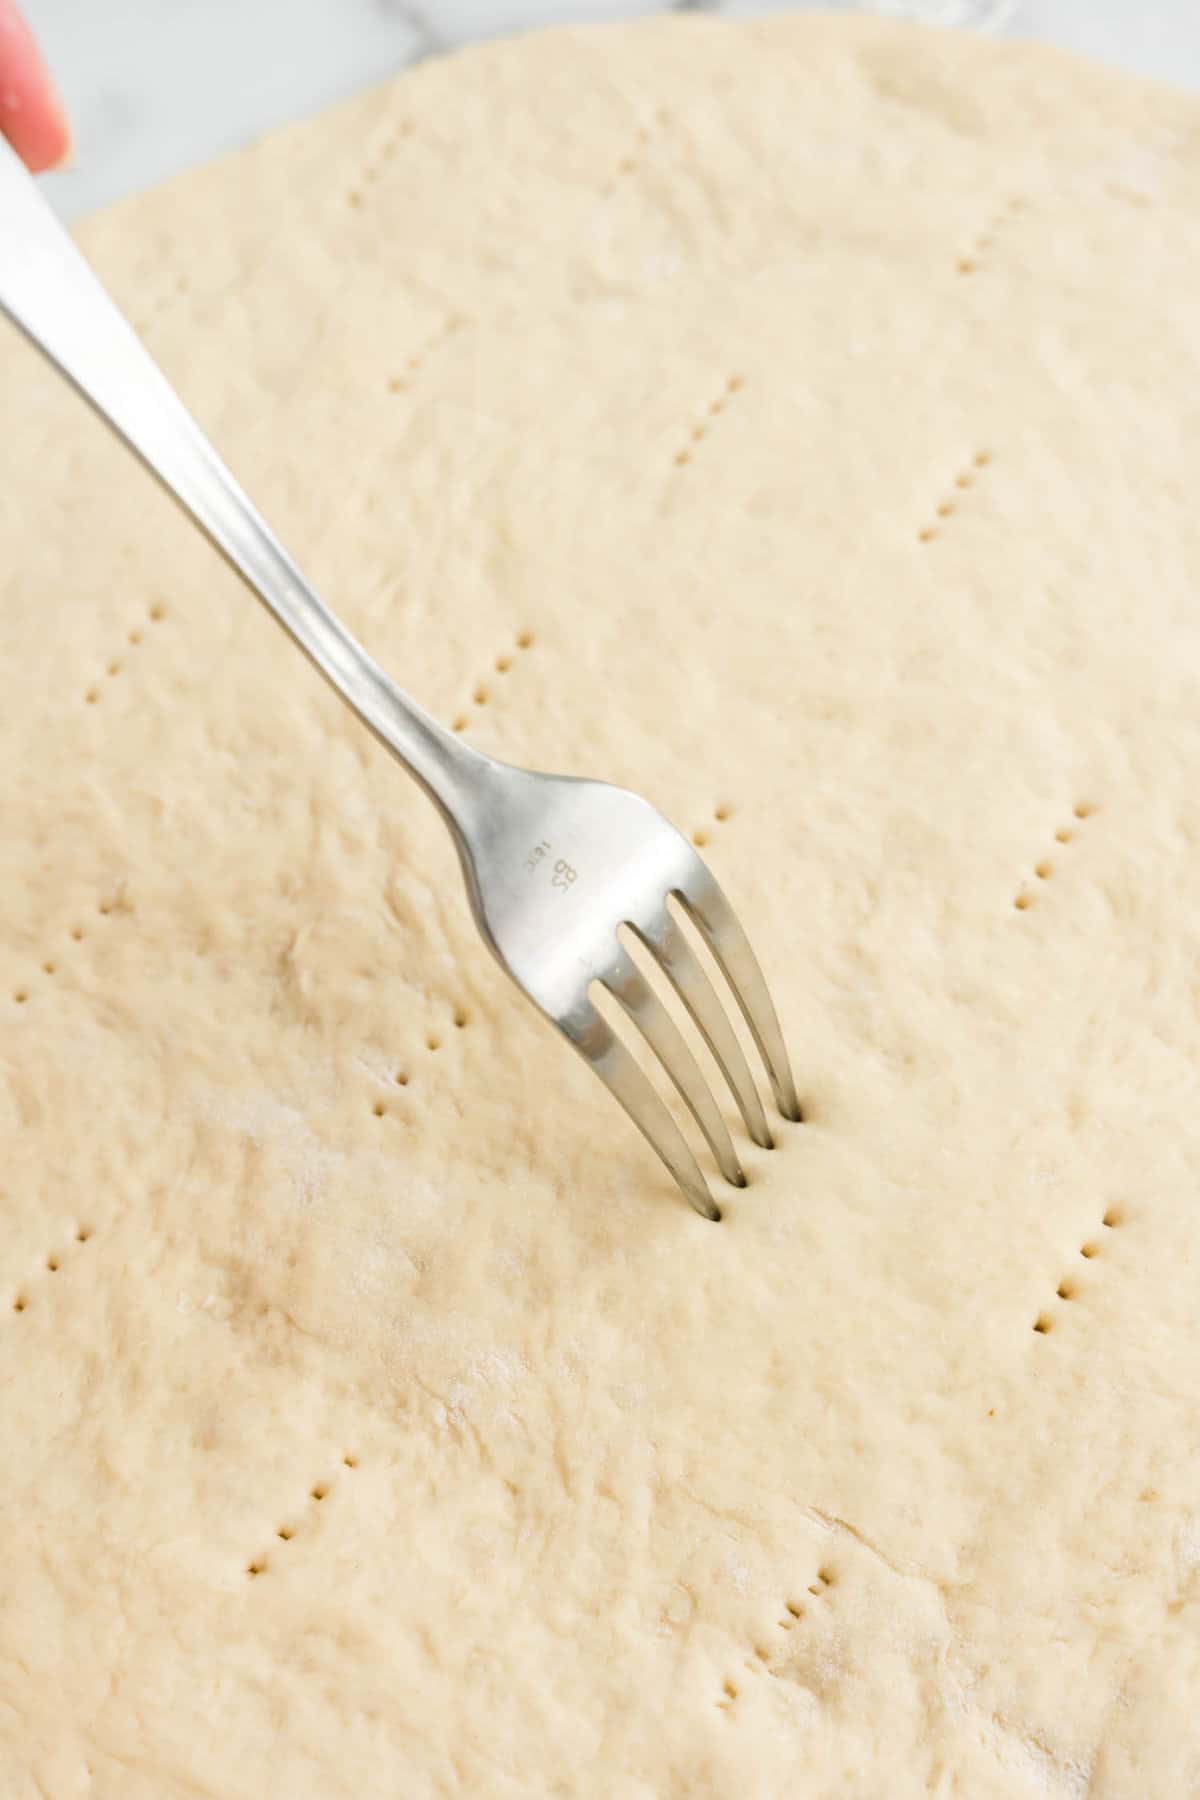 Piercing Homemade Pizza Dough with Fork